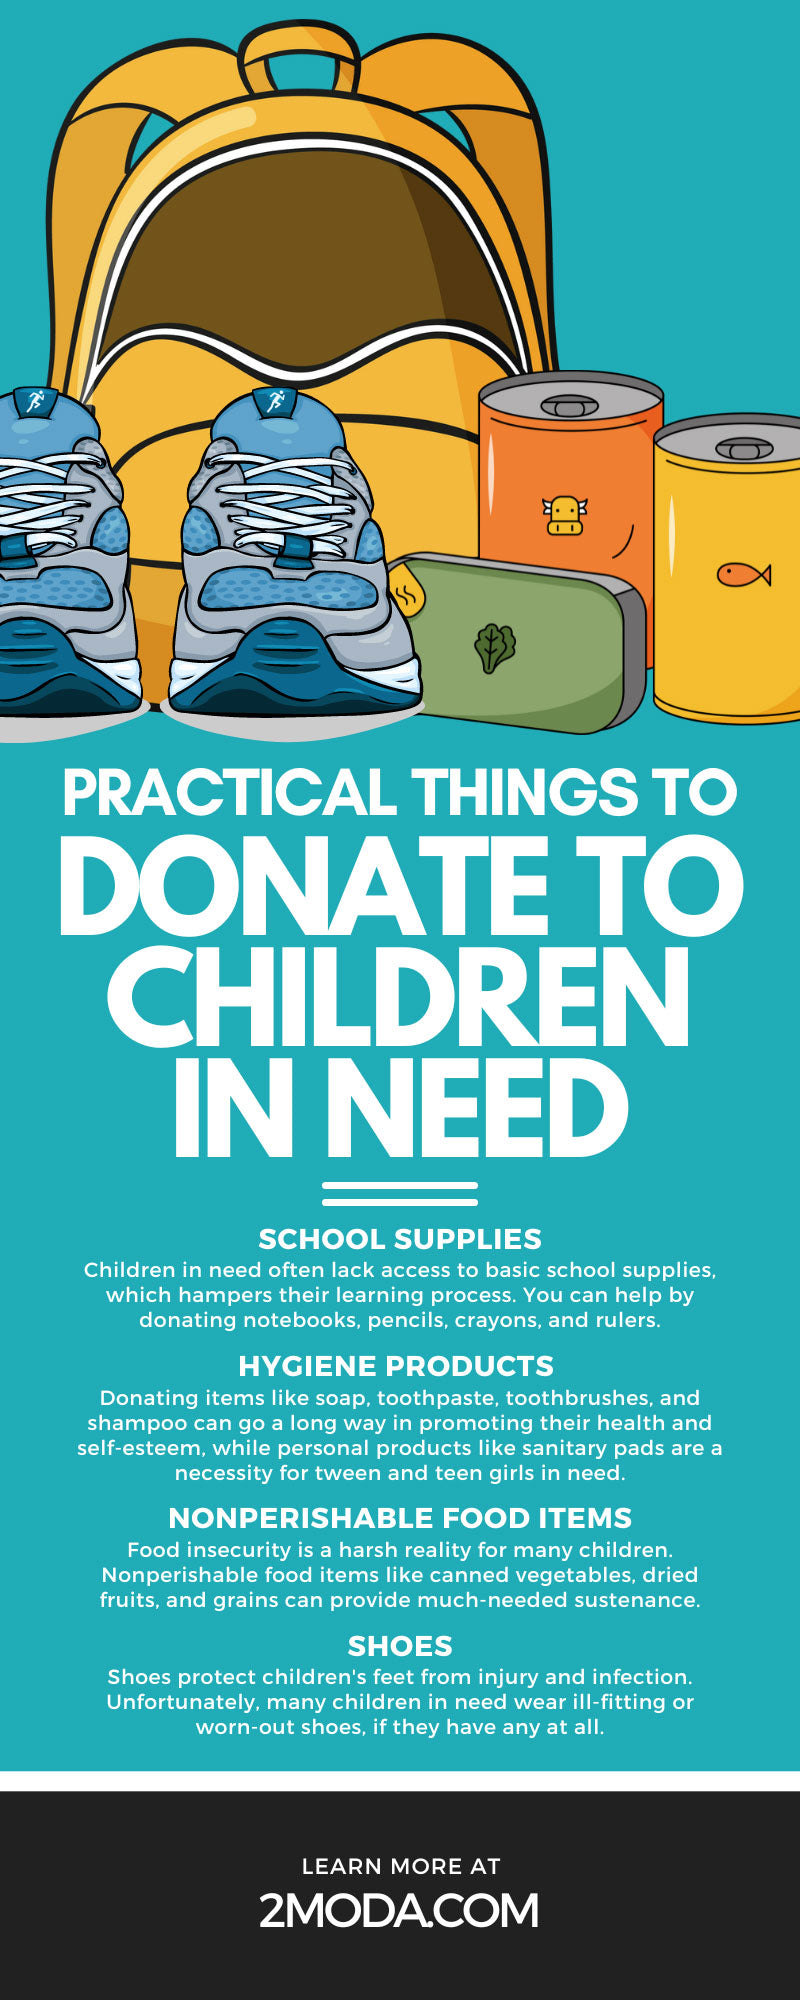 Practical Things To Donate to Children in Need